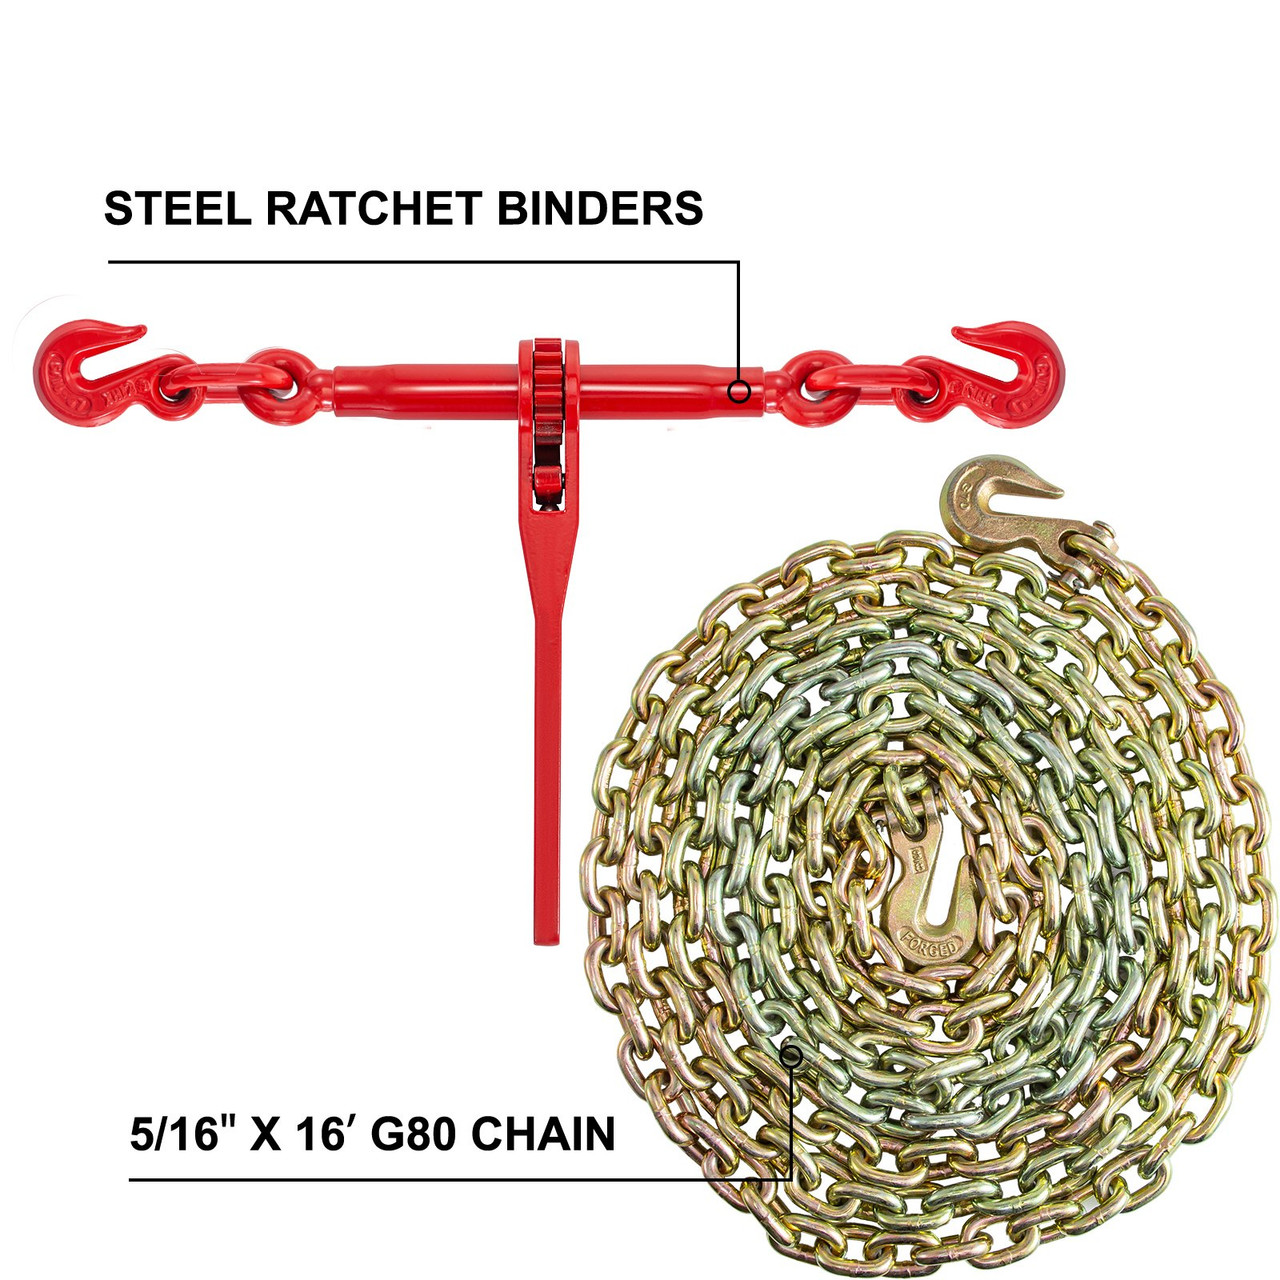 Chain and Binder Kit 5/16in-3/8in, Ratchet Load Binders 6600lbs Working Strength, Ratchet Binders and Chains, 5/16in x 20ft Chains w/ G70 Hooks, for Truck, Tie Down, Hauling, Towing